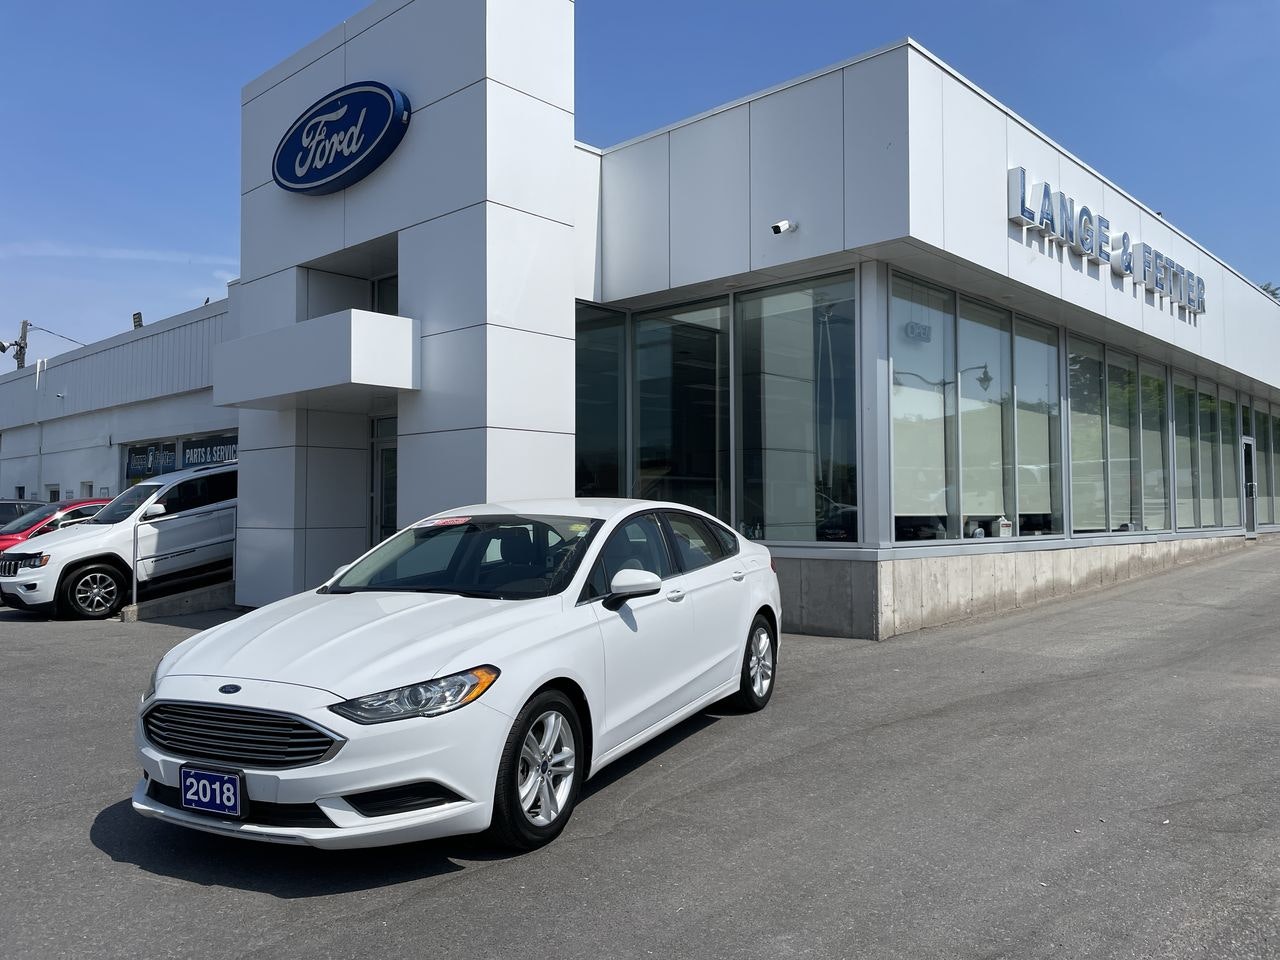 2018 Ford Fusion - P21087 Full Image 1